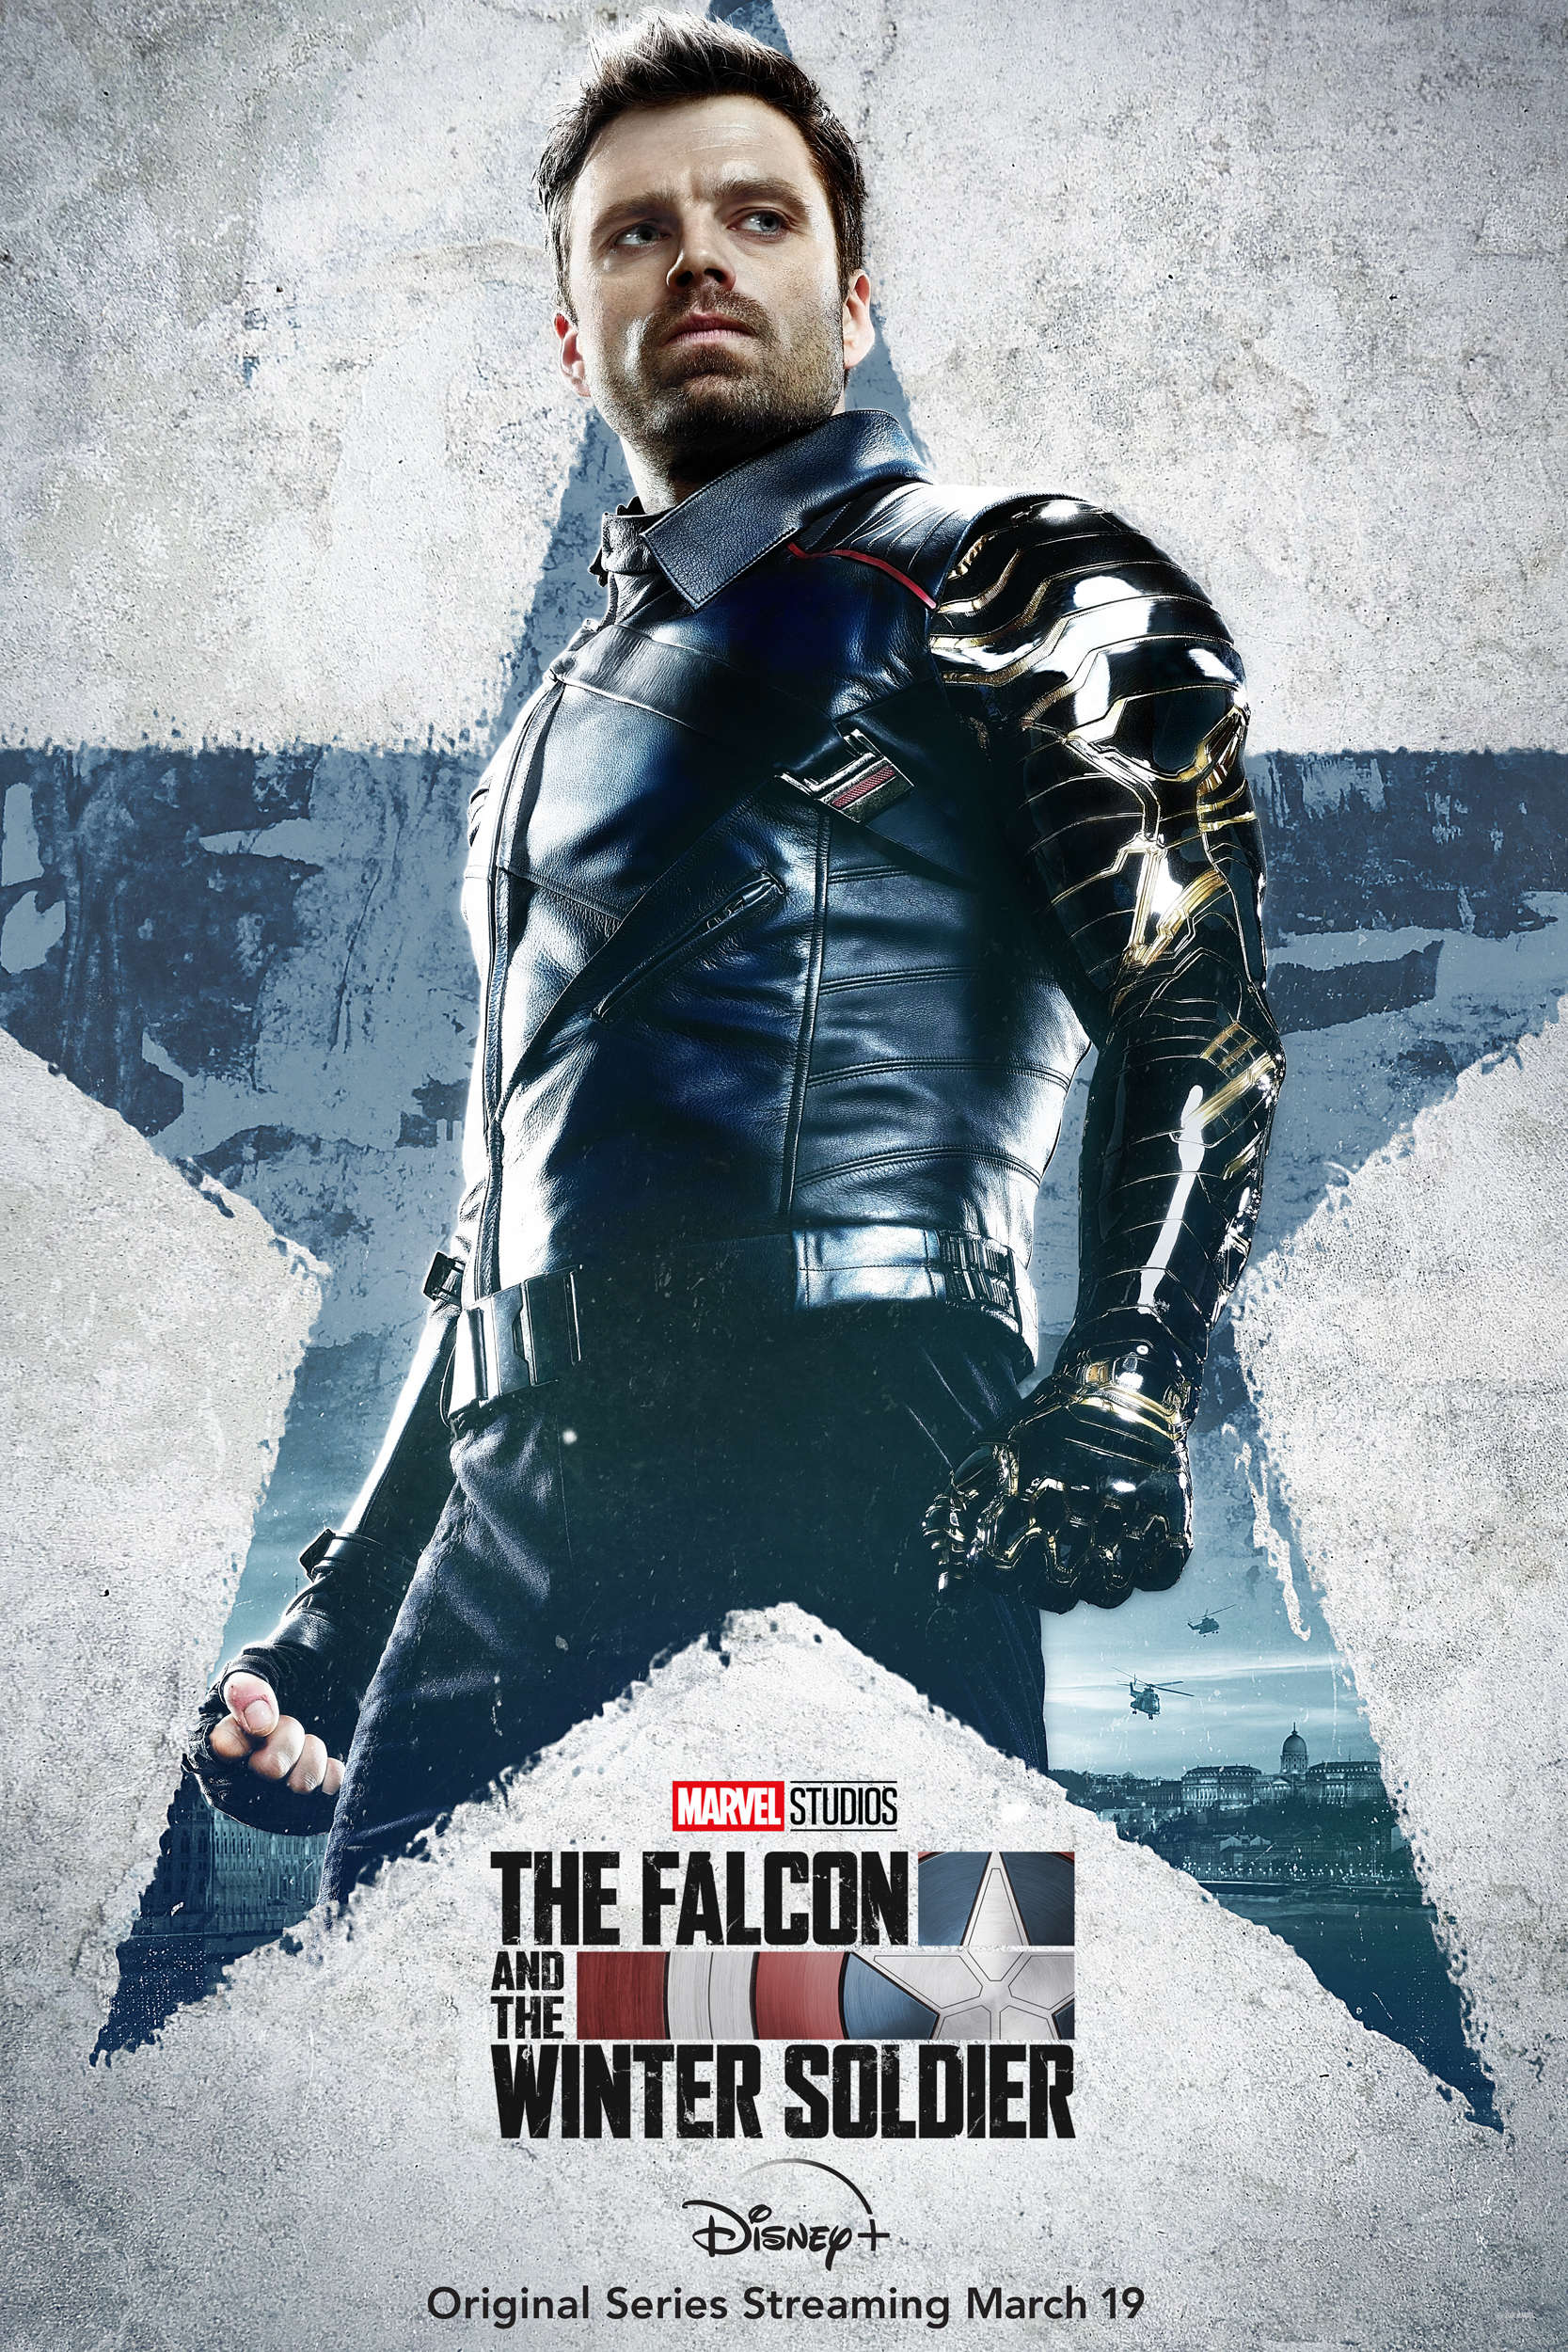 The Falcon and the Winter Soldier Bucky Barnes poster